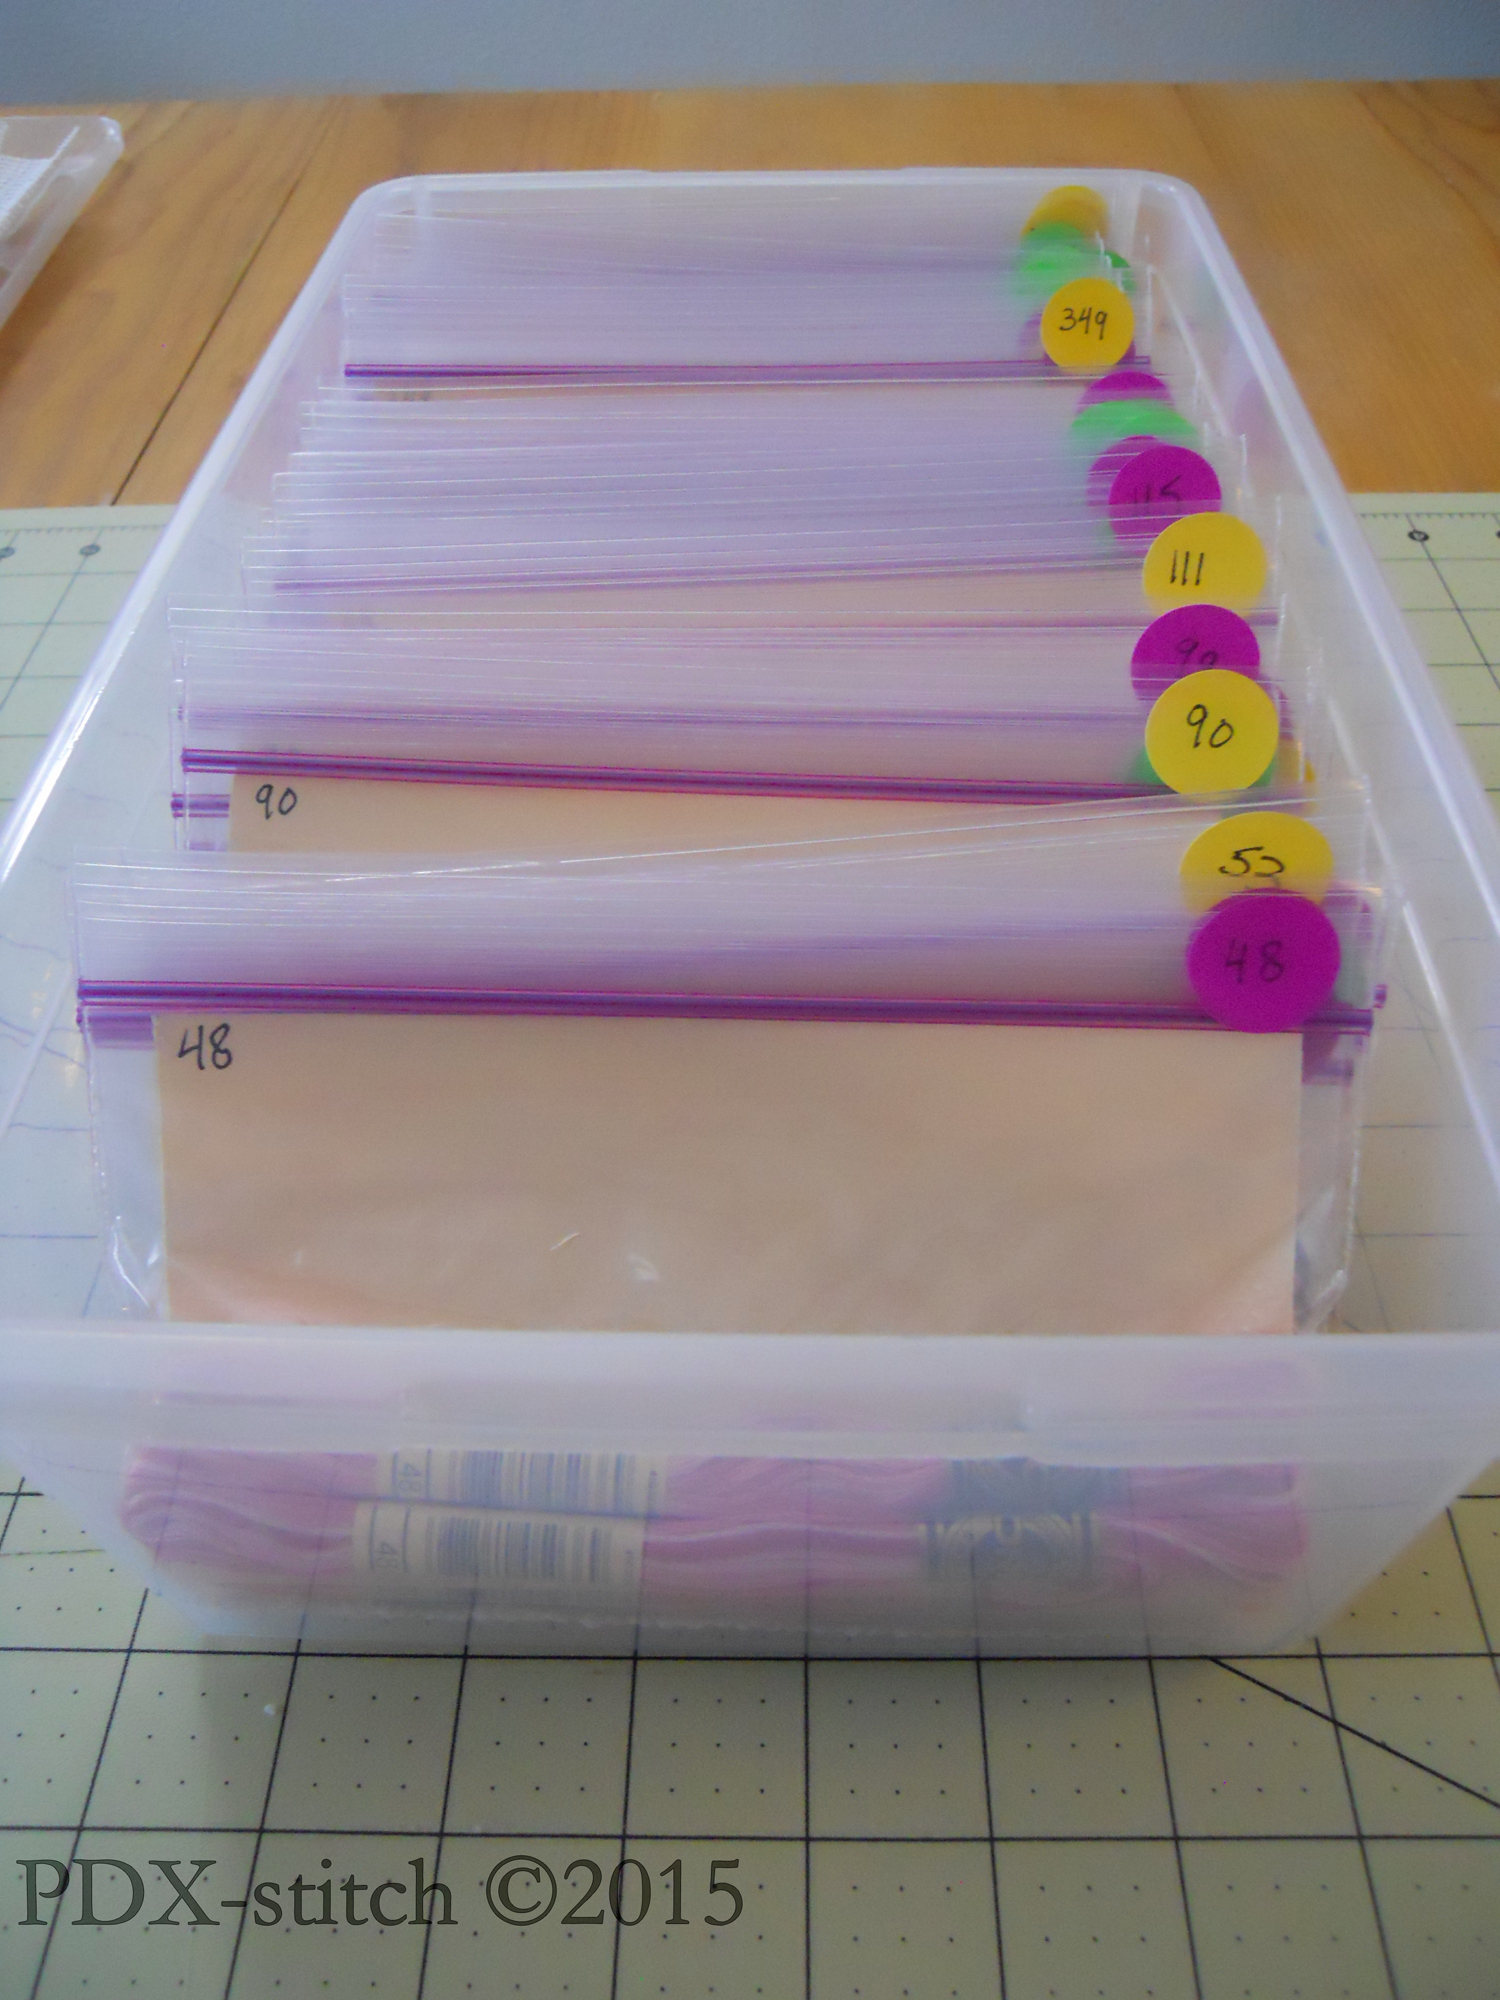 Tutorial: Organizing Embroidery Floss